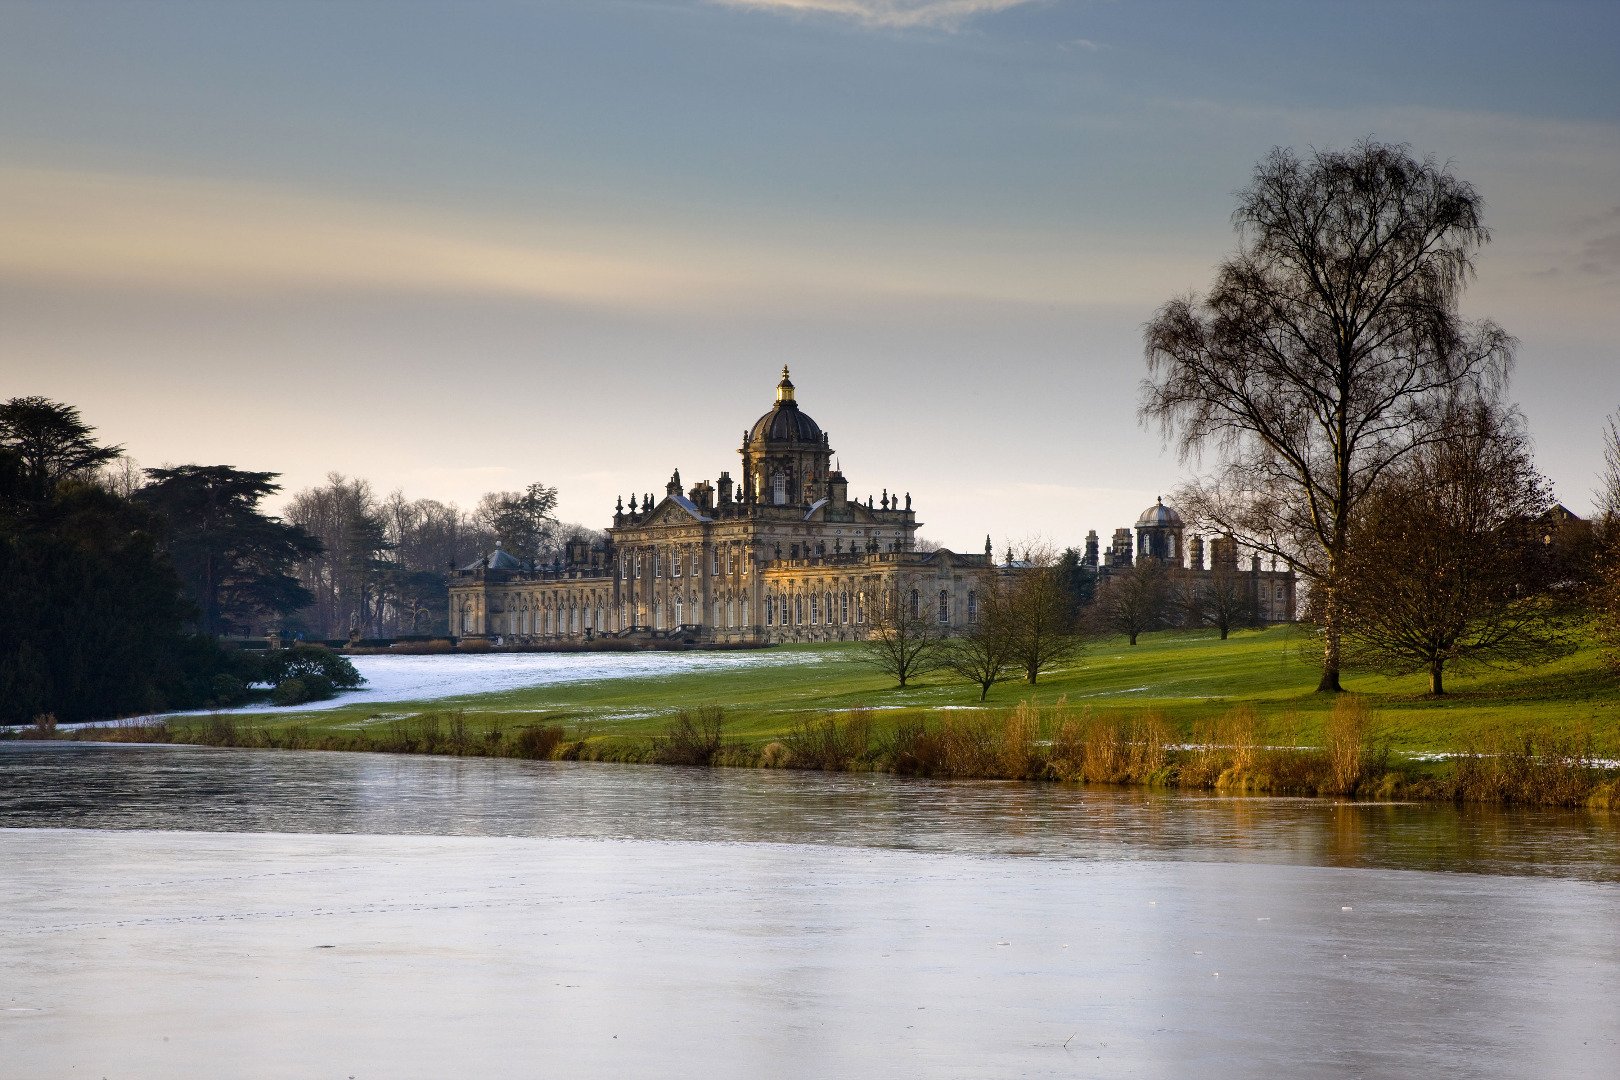 Image name castle howard and south lake mike kipling the 16 image from the post Yorkshire Stately Homes and Gardens in Yorkshire.com.